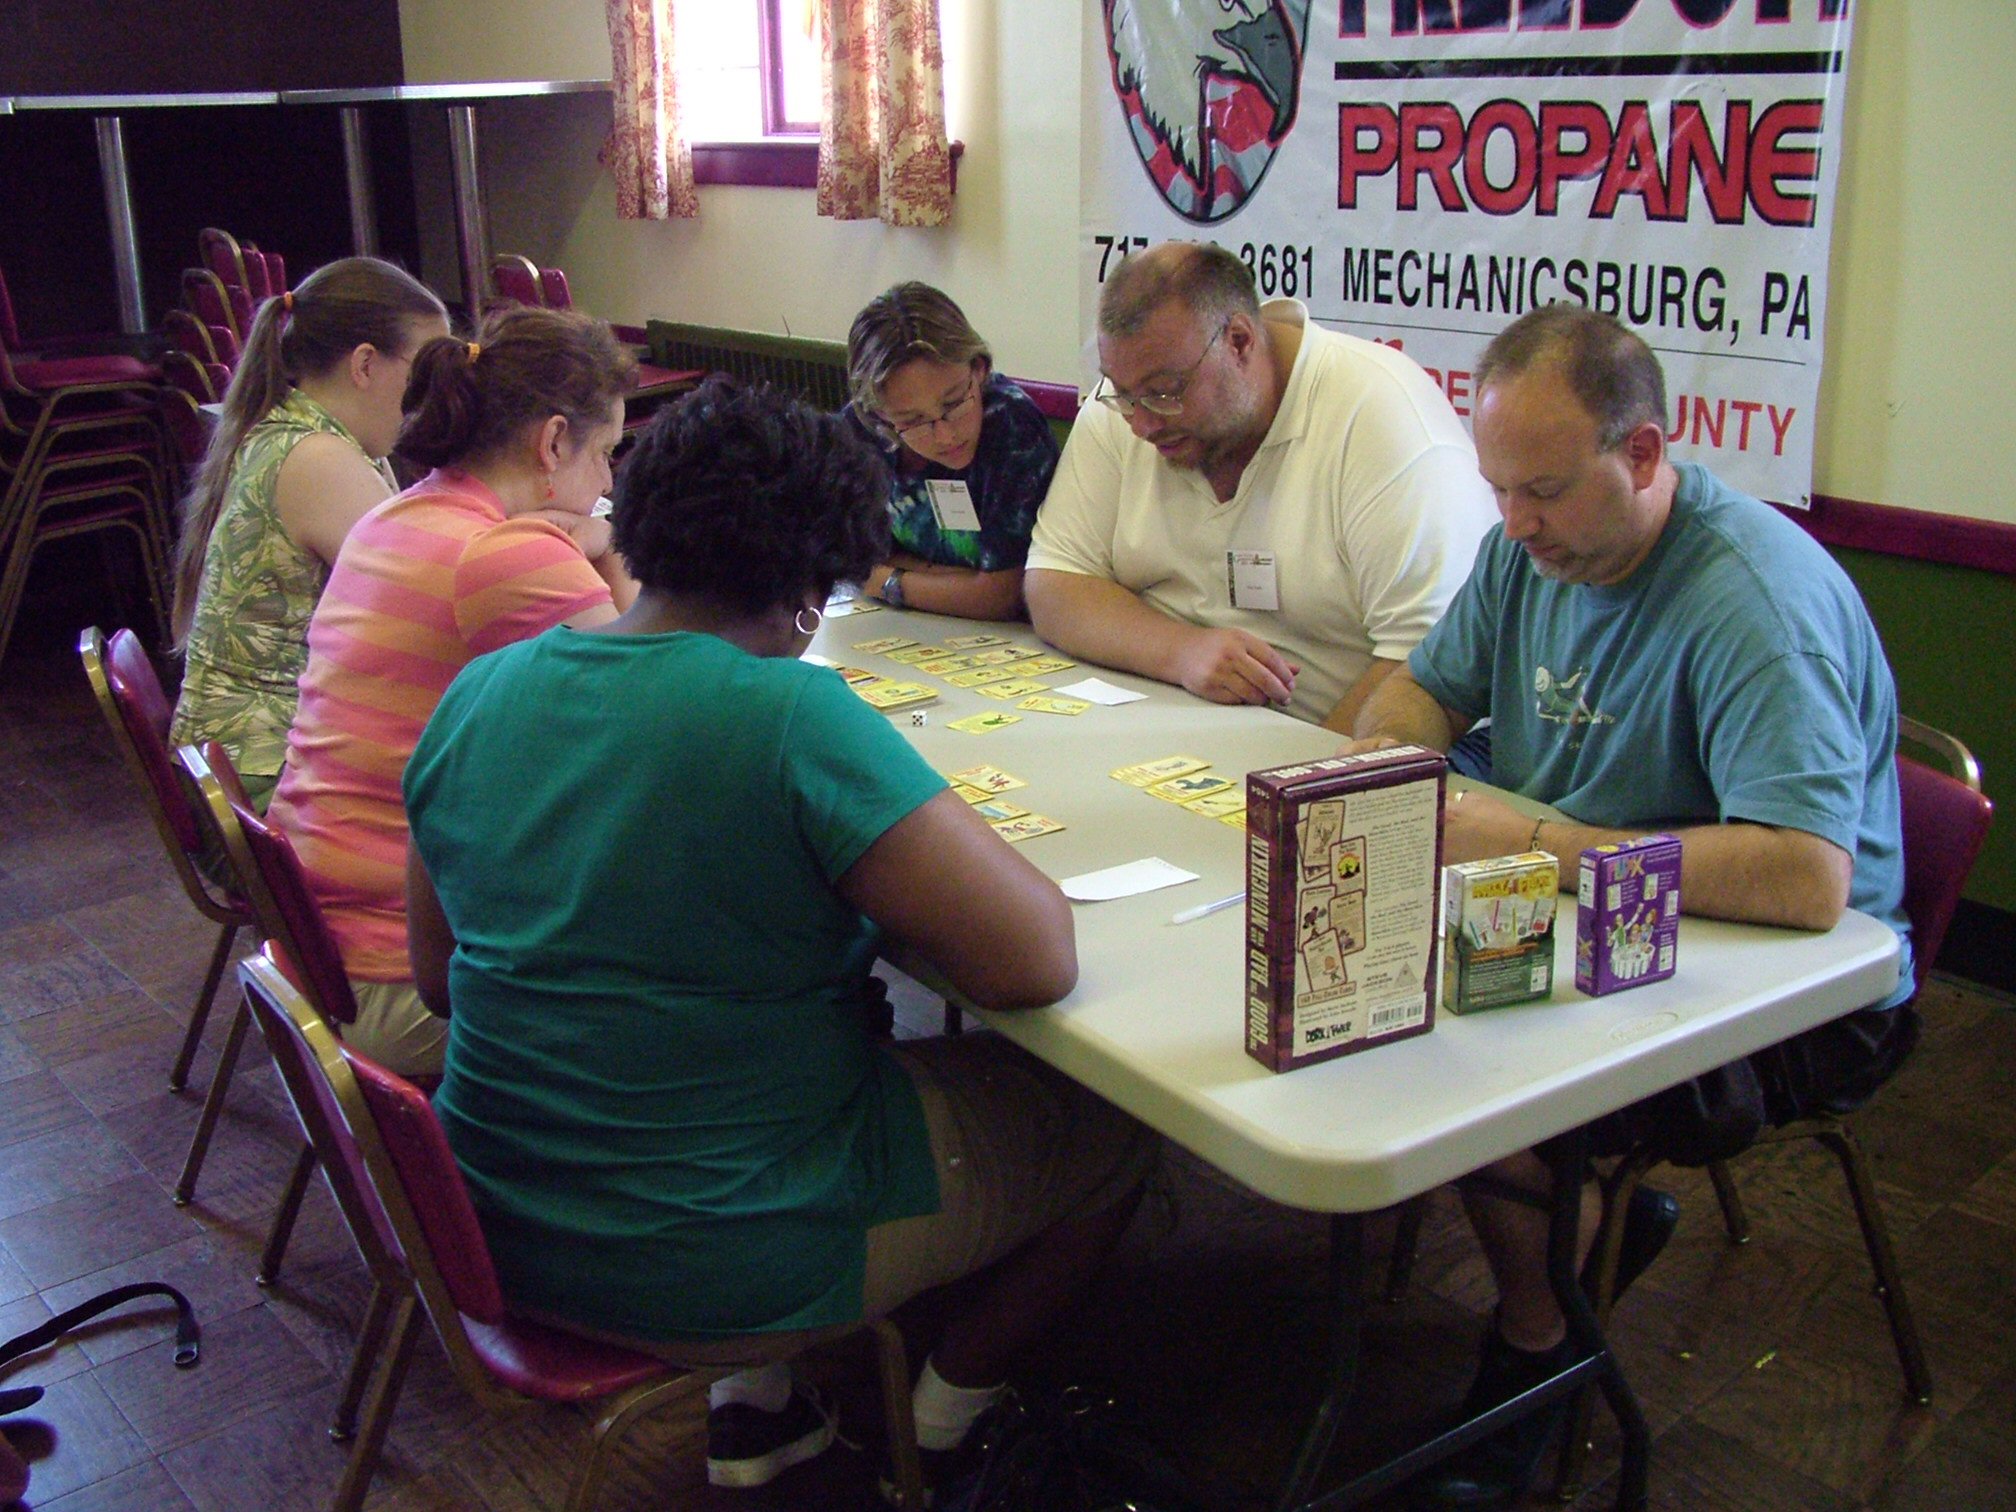 Erica running one of several Munchkin game demos over the weekend.